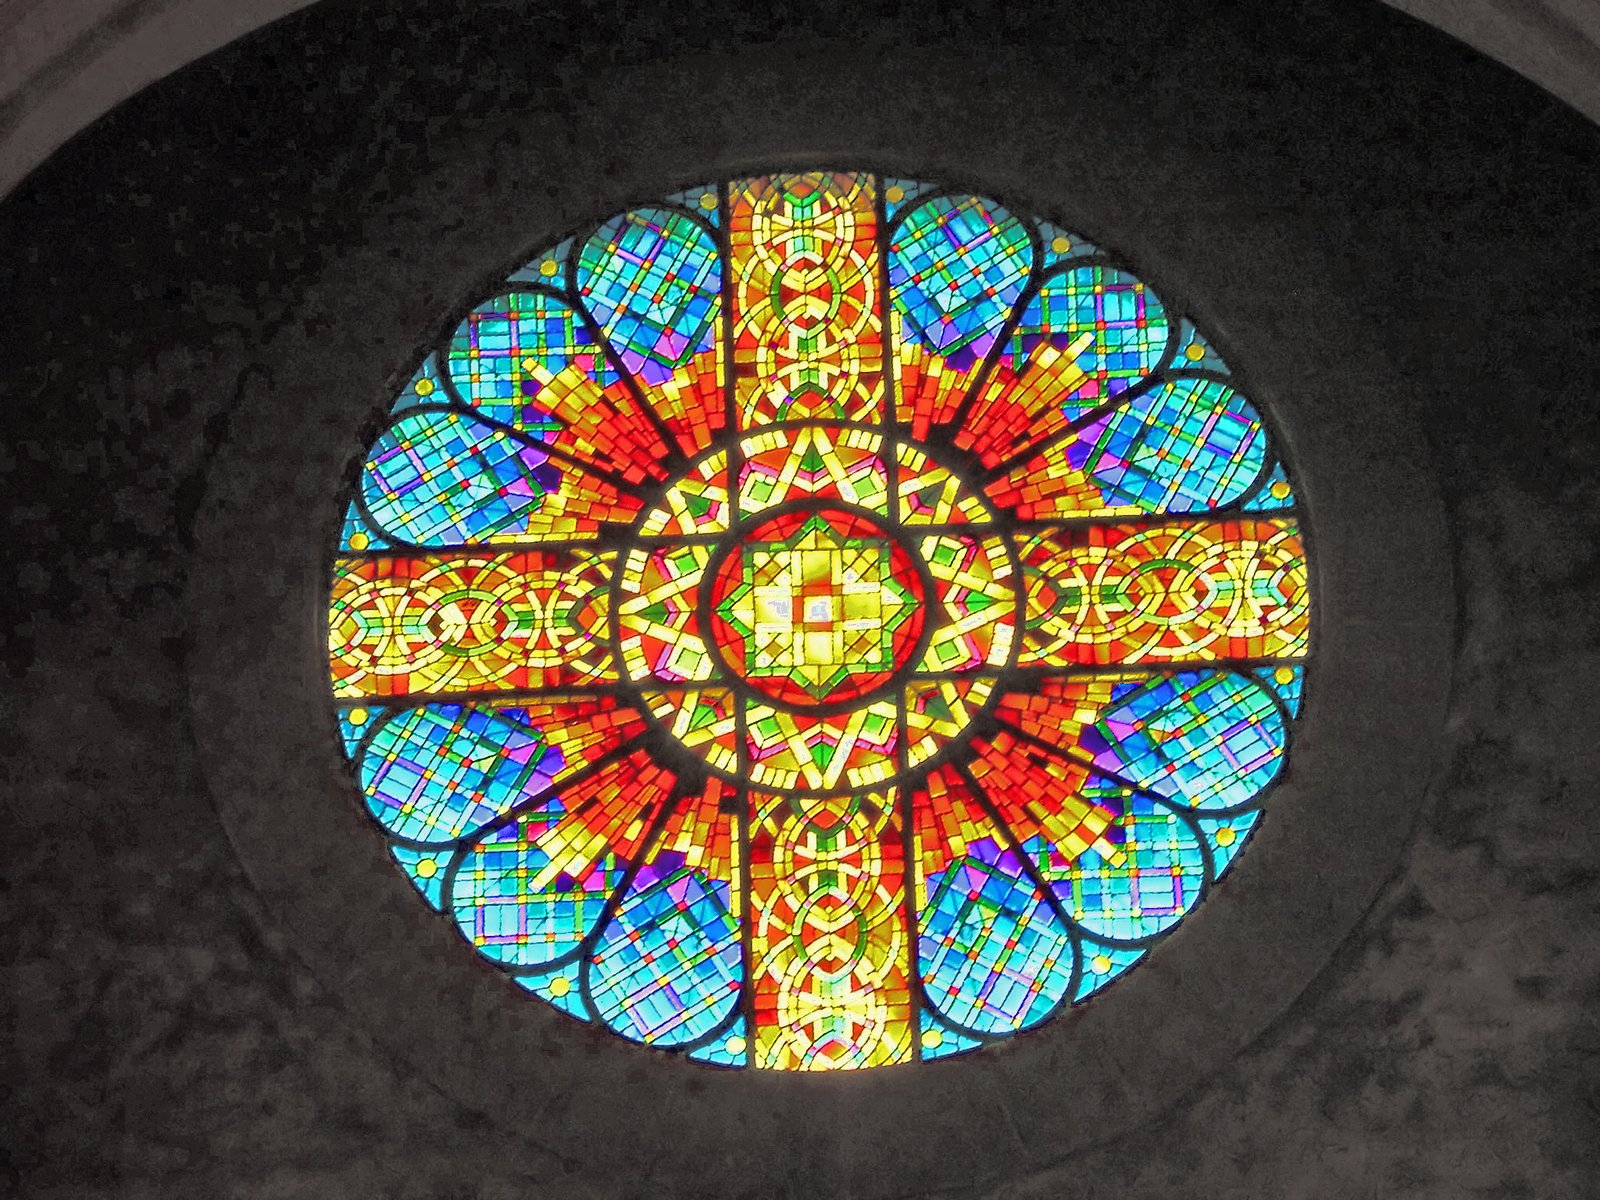 the cross of stain glass is displayed in the center of the building